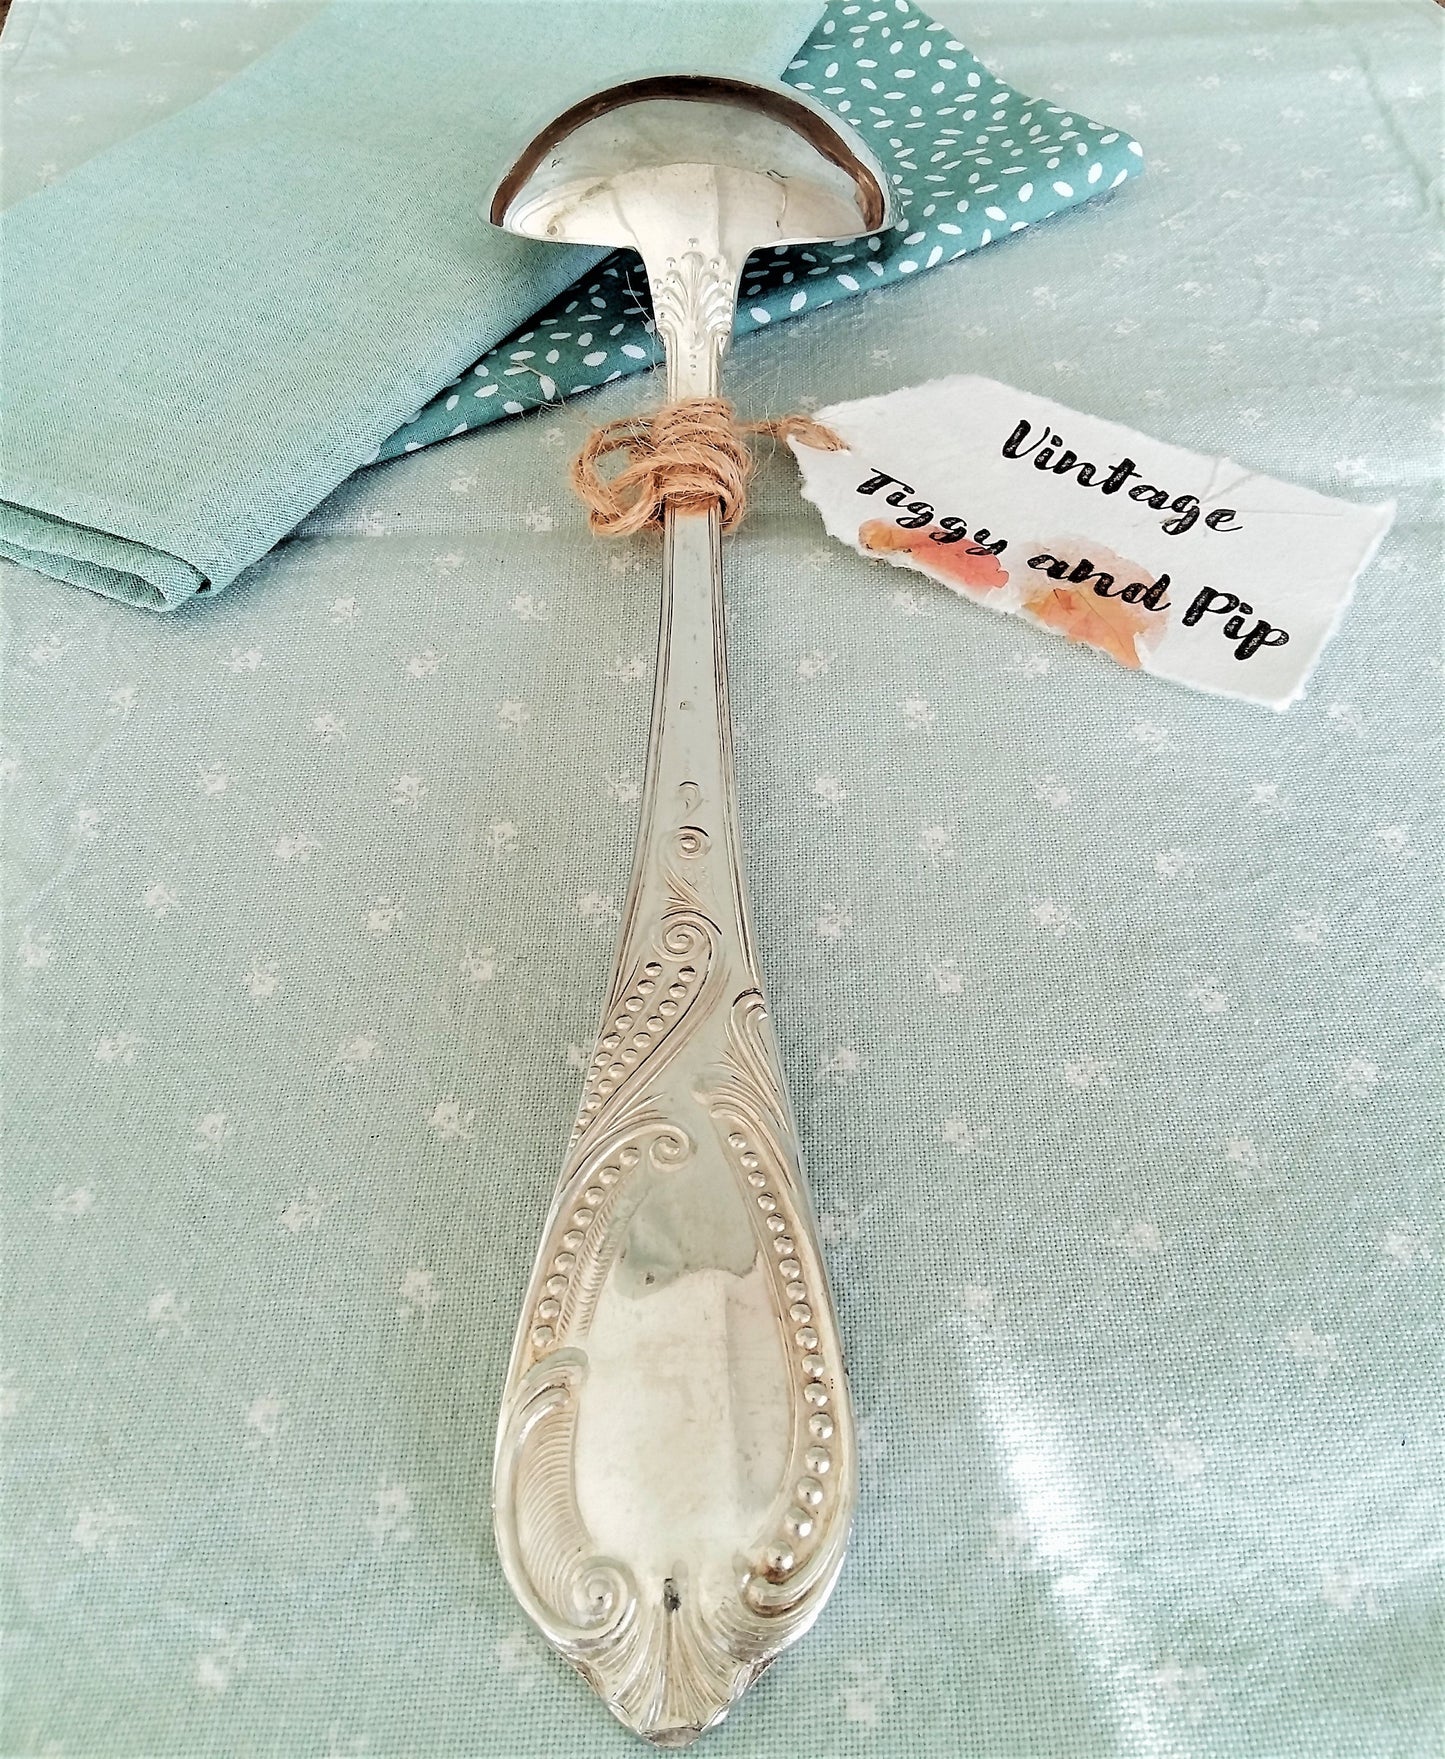 Silver Plated, Vintage Ladle. Large, Heavy, Ornate Silver Plate Ladle. from Tiggy & Pip - €62.00! Shop now at Tiggy and Pip